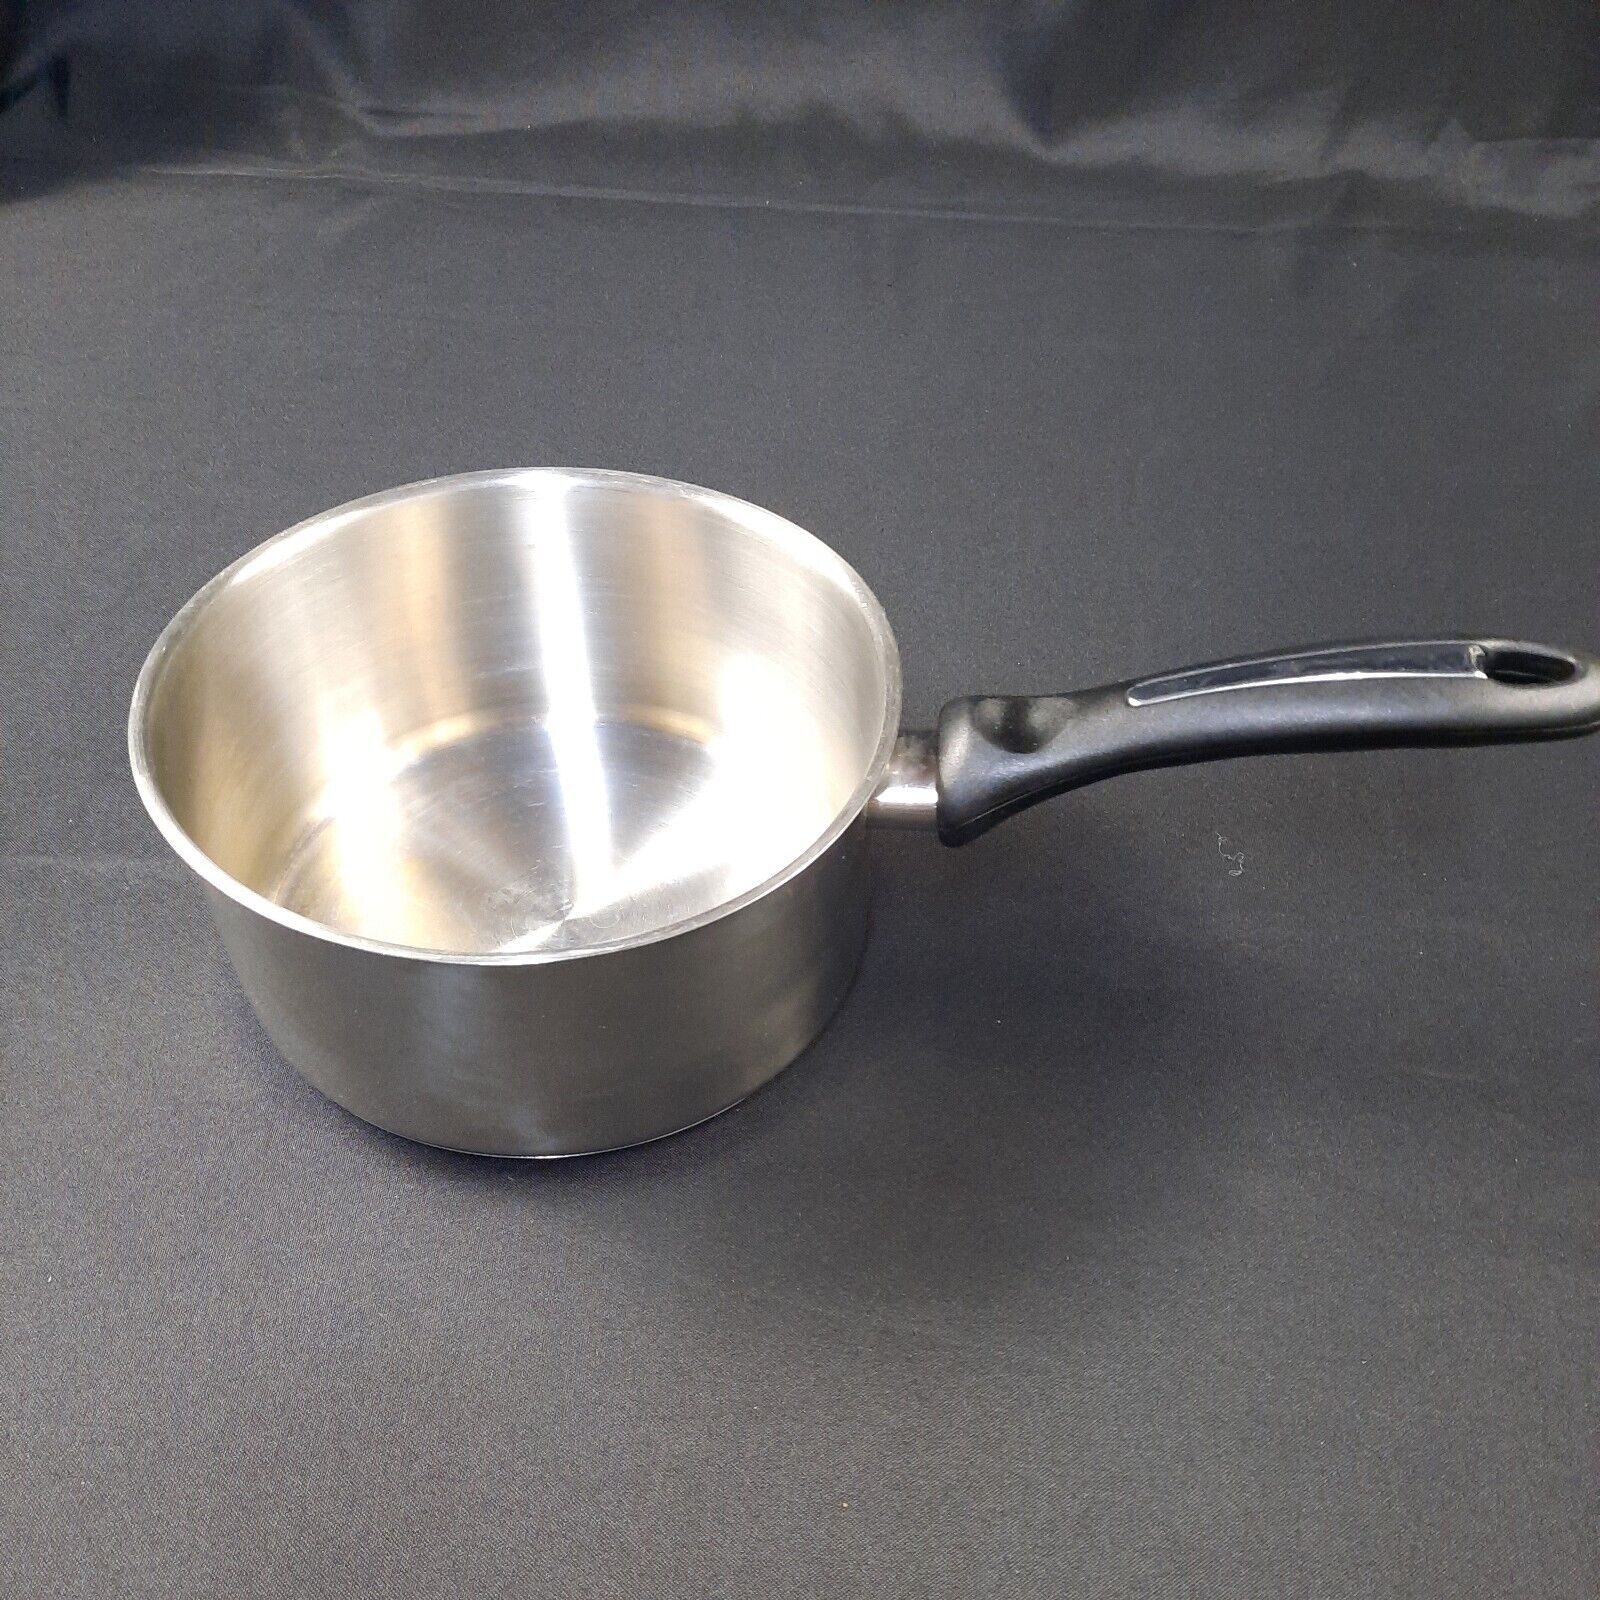 Bialetti 3 Quart Cooking Pan No Lid 18/10 Stainless Steel